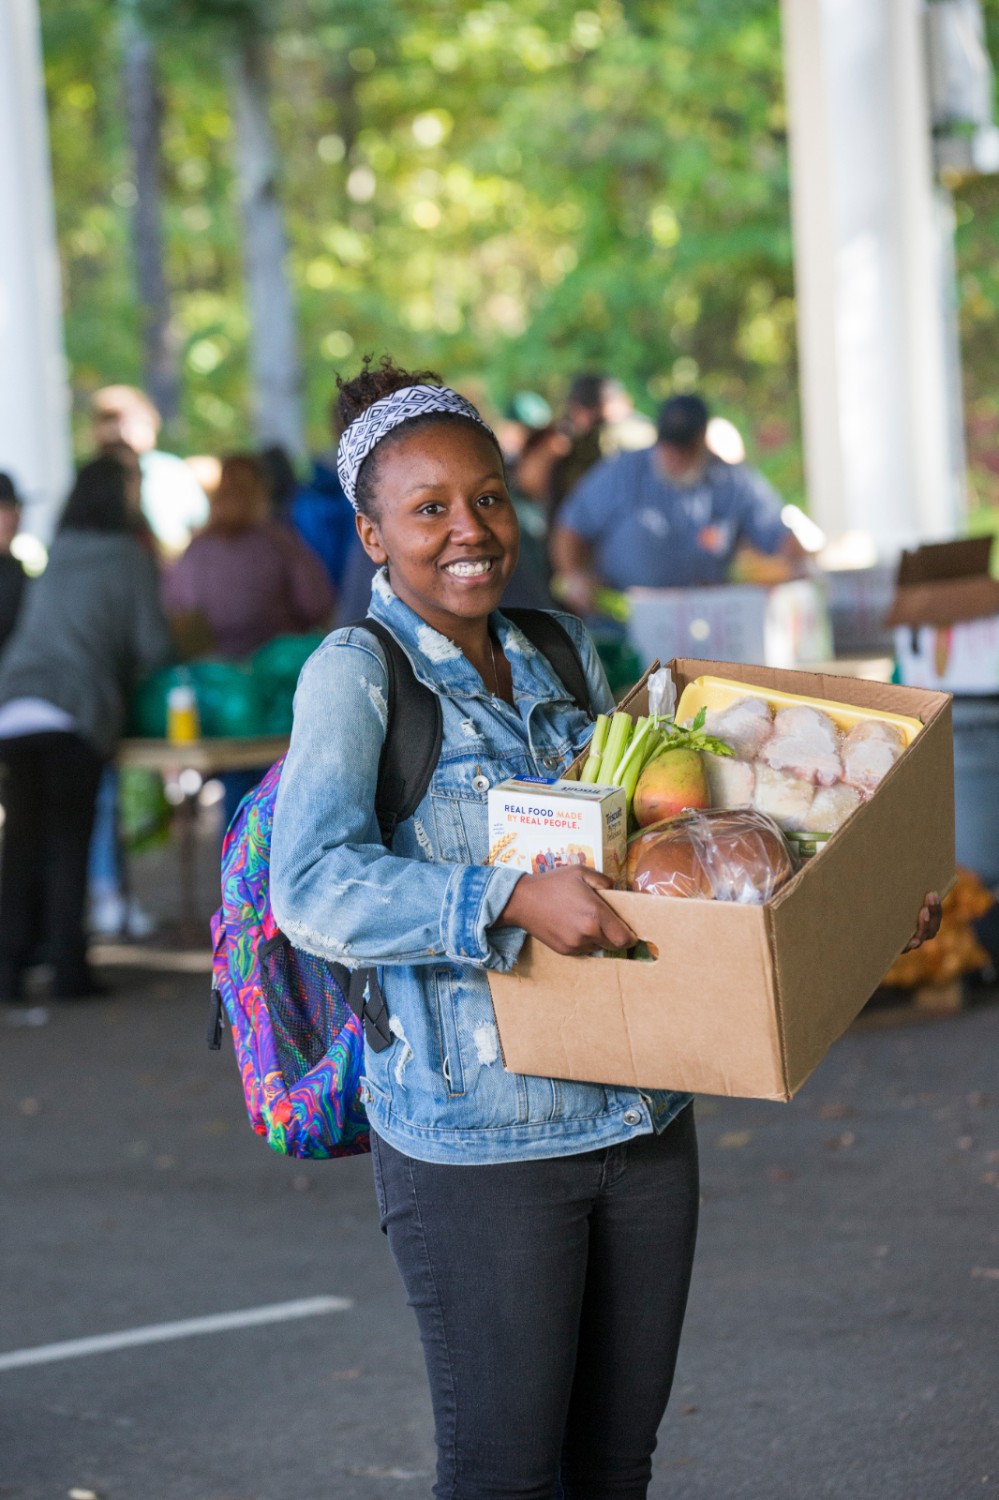 https://corporate.walmart.com/content/corporate/en_us/news/2019/04/22/walmart-and-sams-clubs-fight-hunger-spark-change-campaign-aims-to-achieve-big-impact-toward-hunger-relief/jcr:content/newsimage.img.jpg/1693432505438.jpg